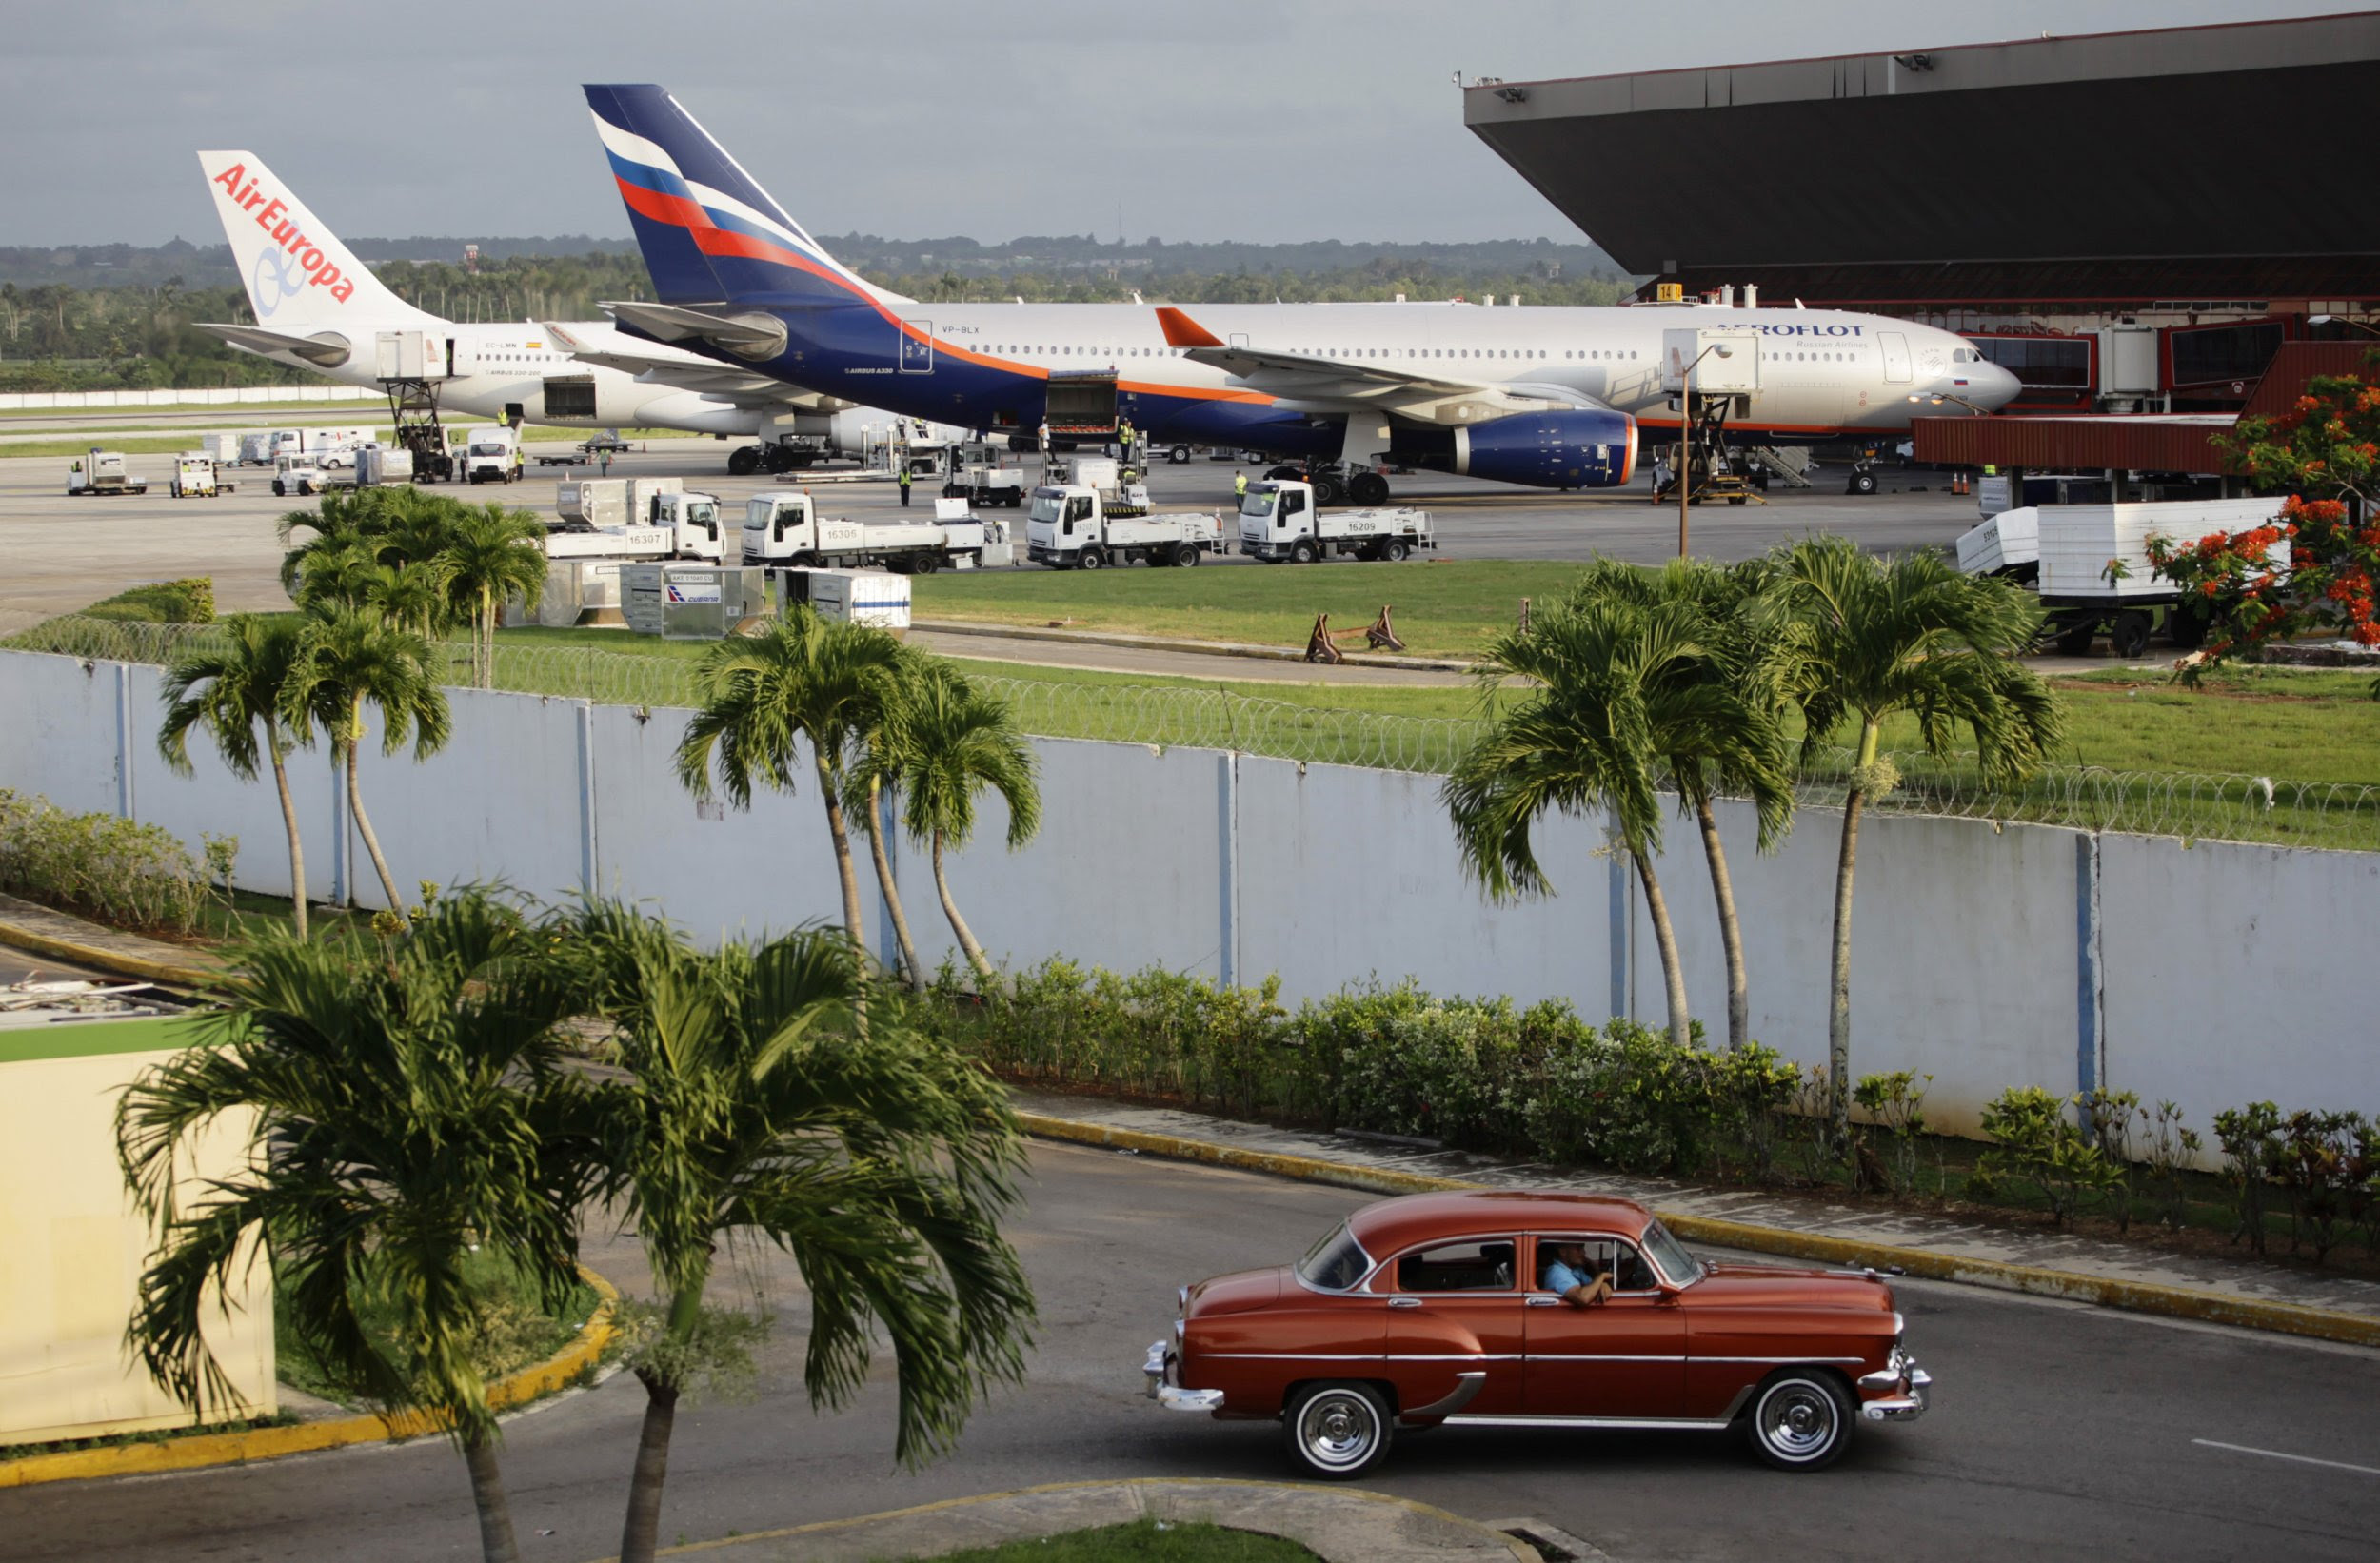 New on Charter Flight Roller Coaster: Eased Cuba Restrictions